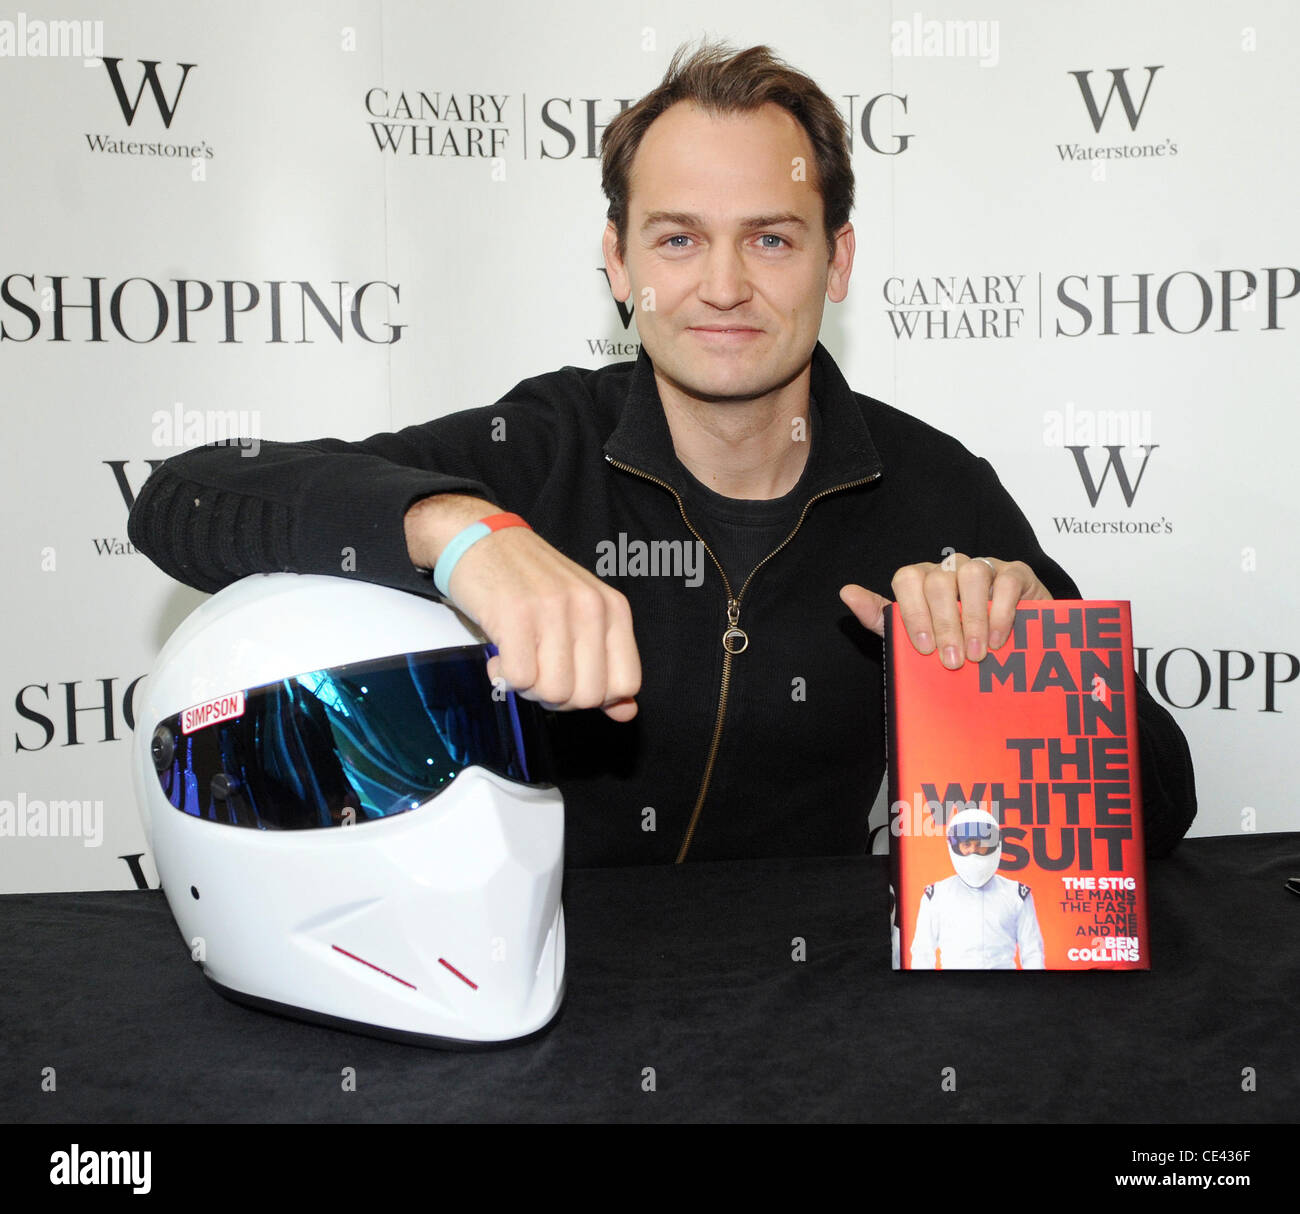 Ben Collins aka 'The Stig' signs his new book 'The Man in the White Suit:  The Stig, Le Mans, the Fast Lane and Me' at Waterstone's, Canary Wharf  London, England - 09.12.10